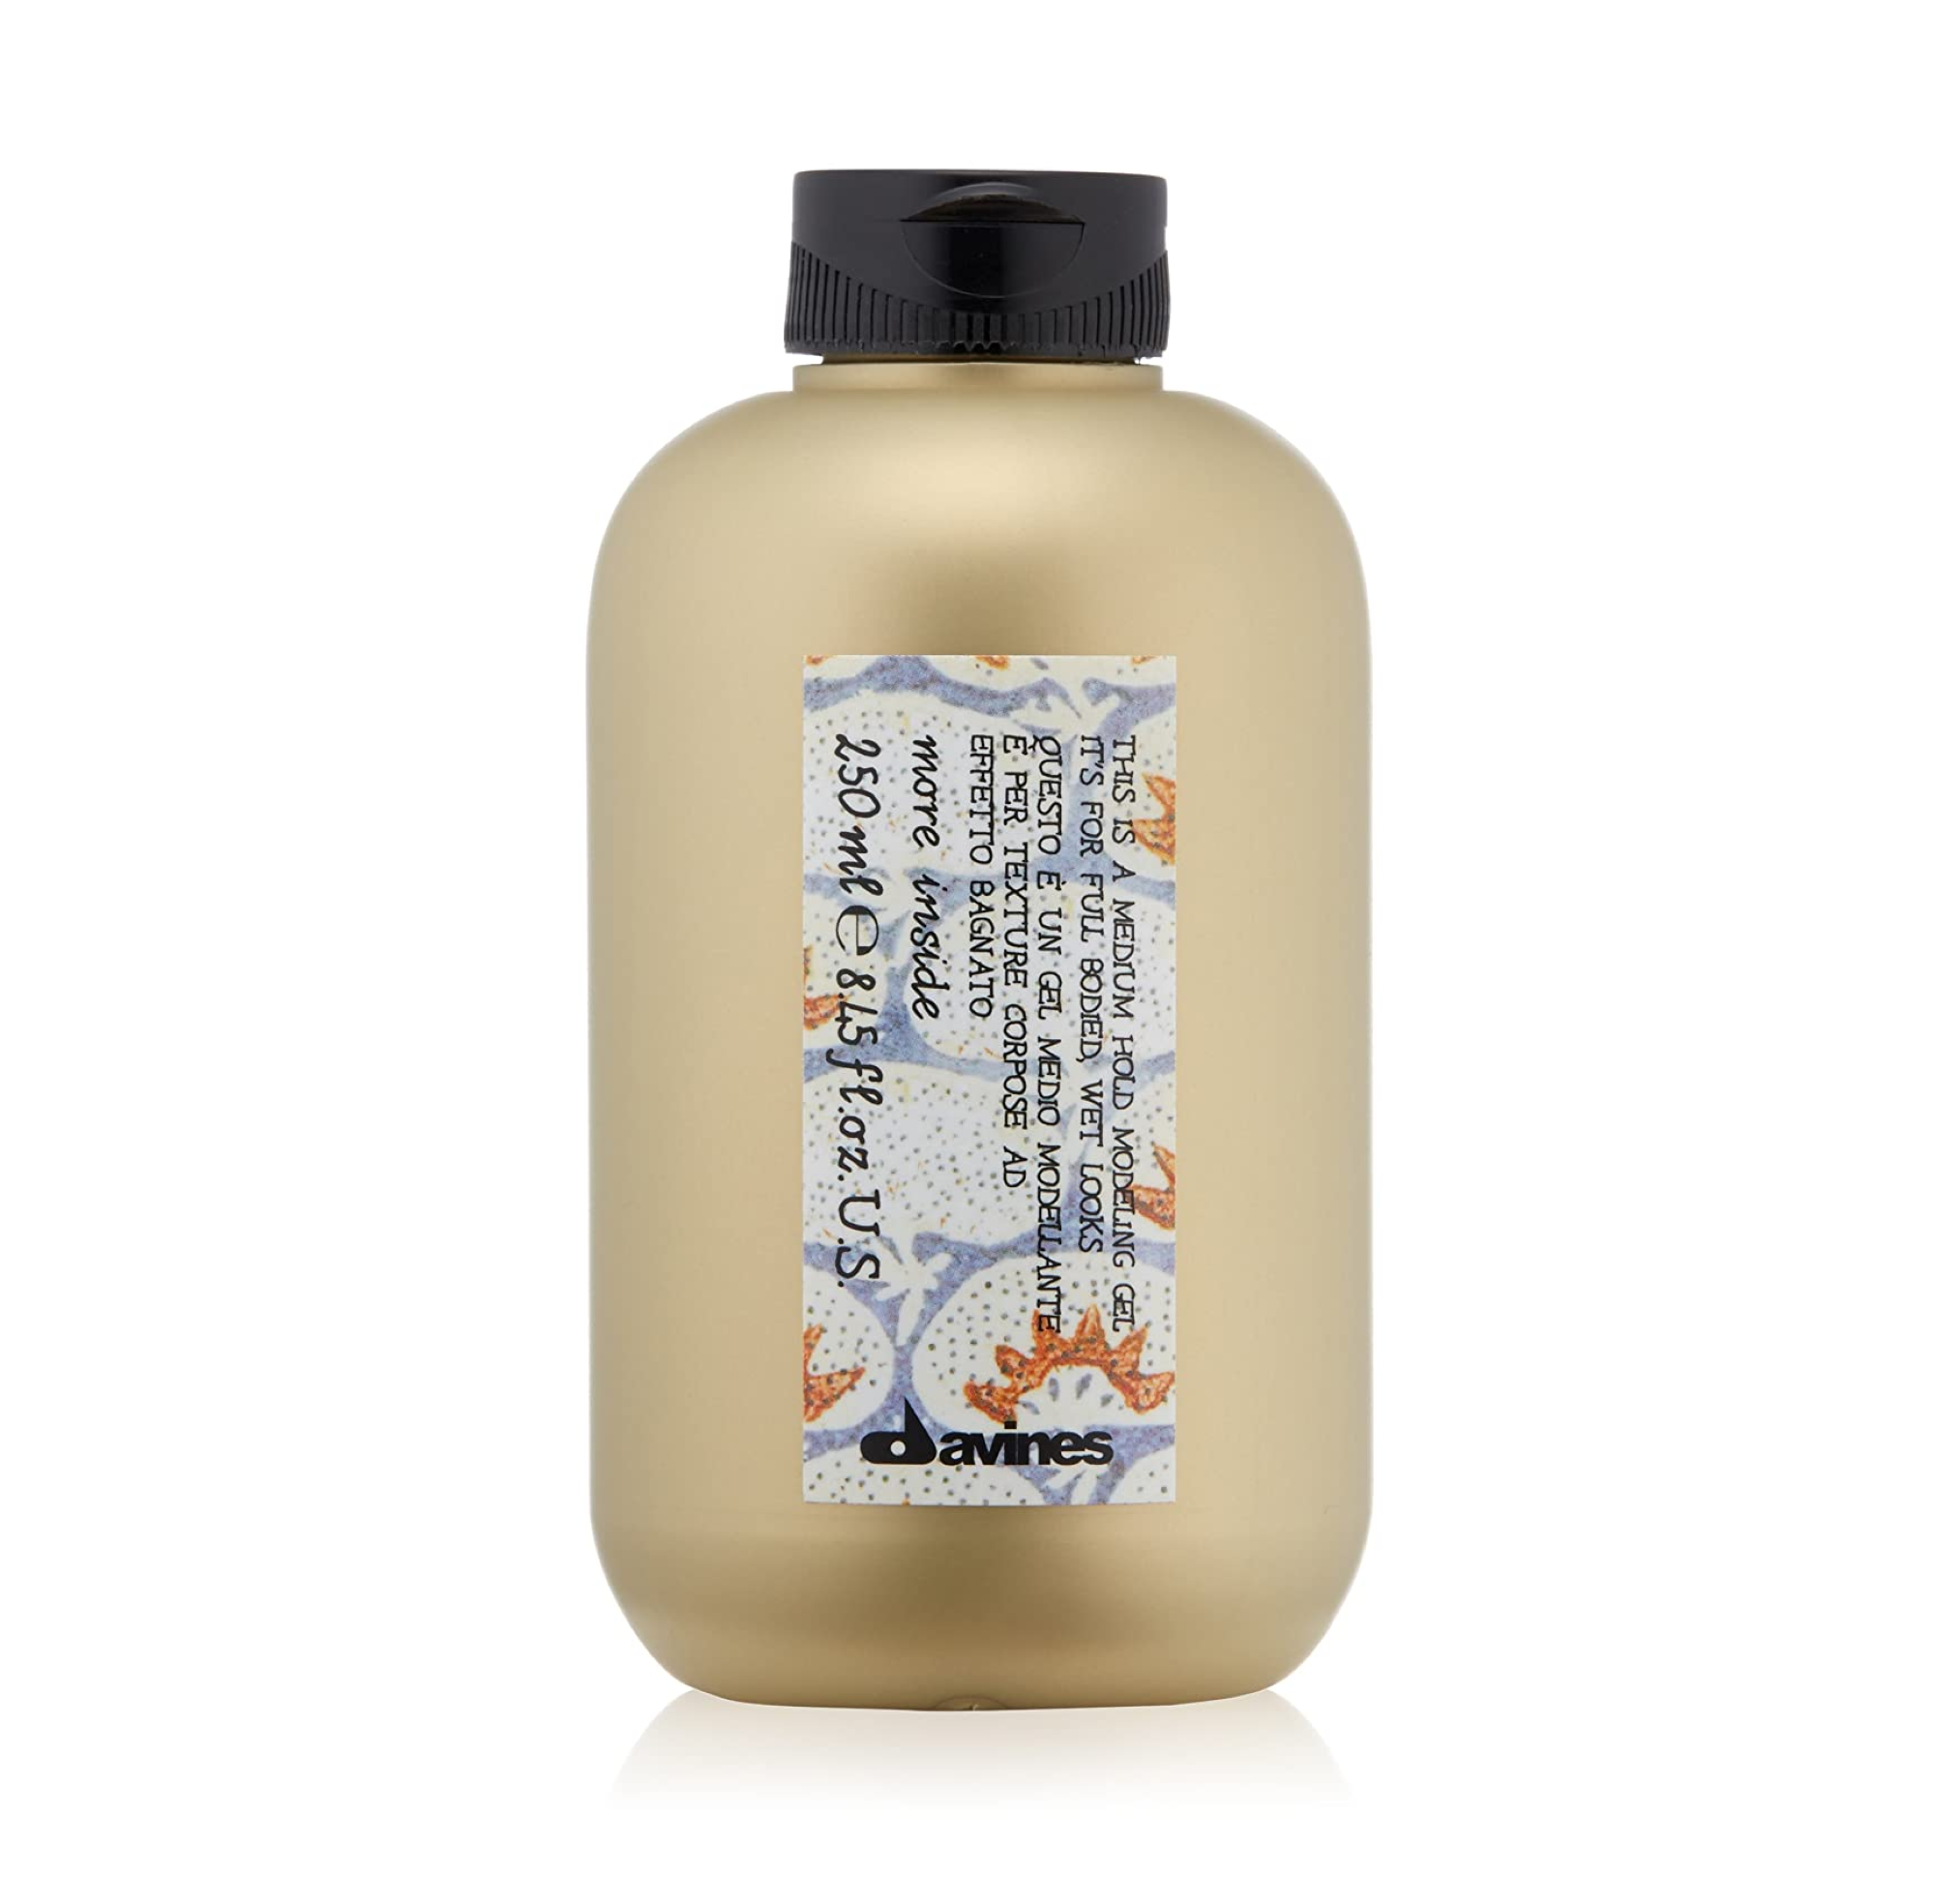 Davines This is a Medium Hold Modeling Gel / 8OZ